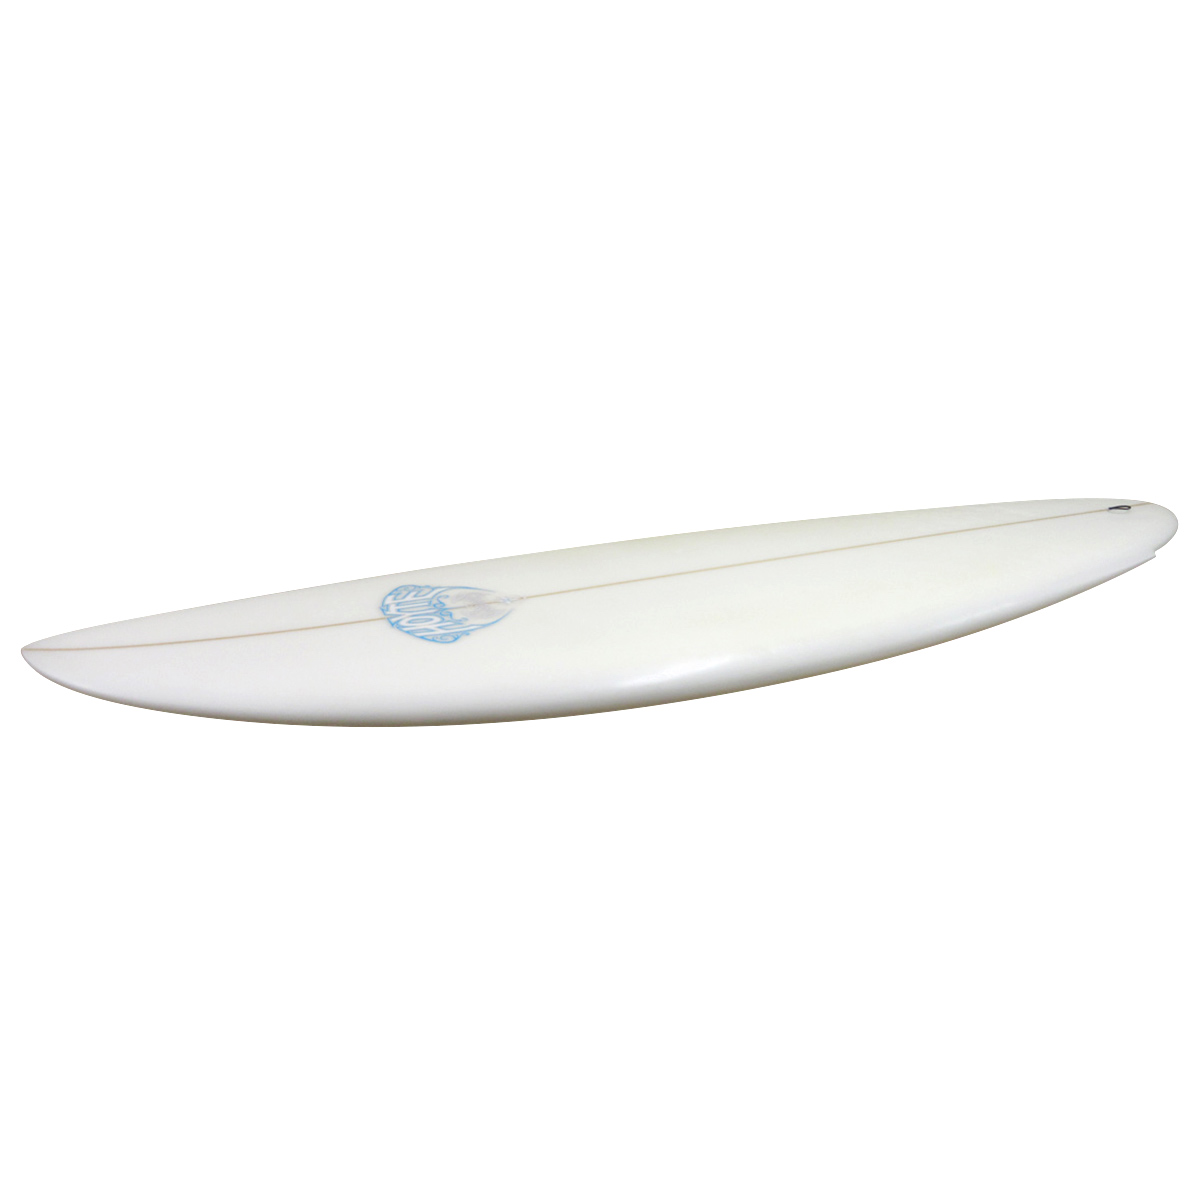 Hoyte Surfboards / SPEED DROID 6'3 Shaped by Russ Hoyte